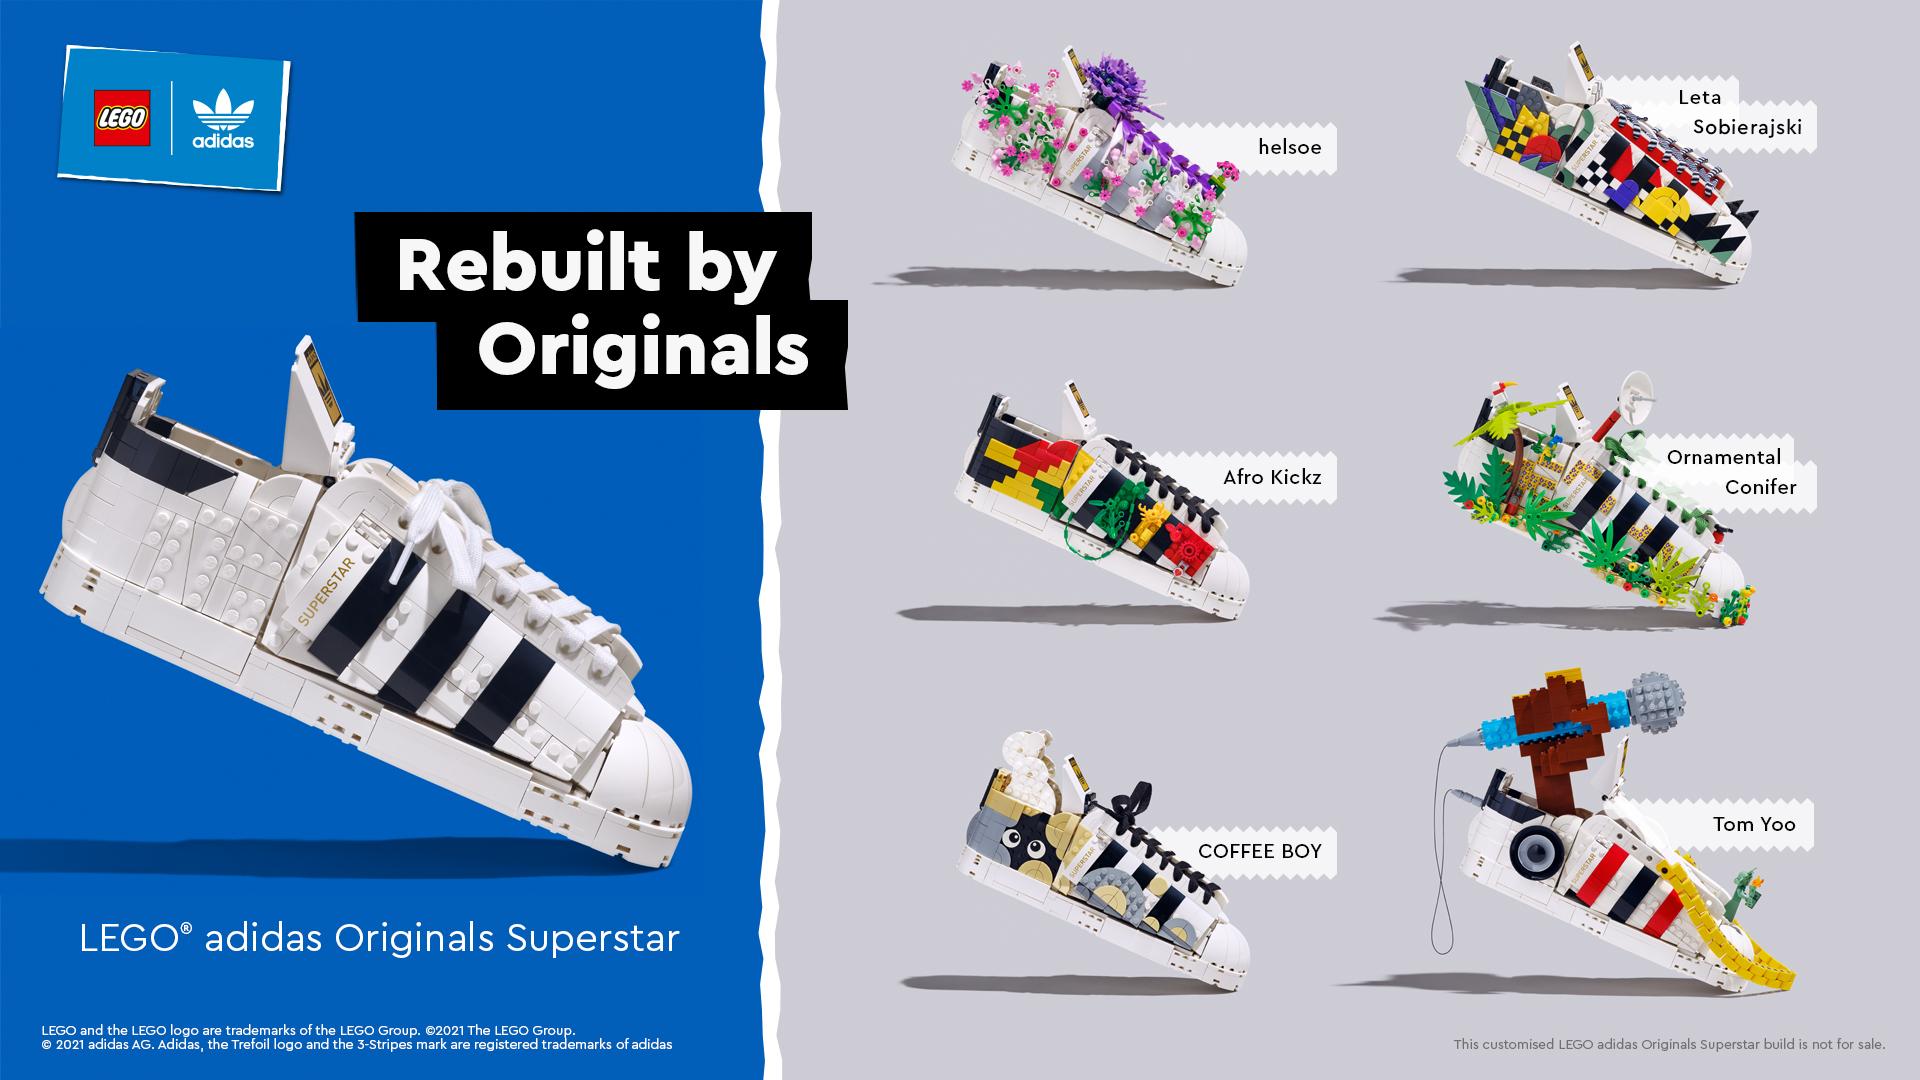 Bacteriën gemeenschap provincie Adidas New Customizable Sneaker, A Collab With Lego - Tech In Africa